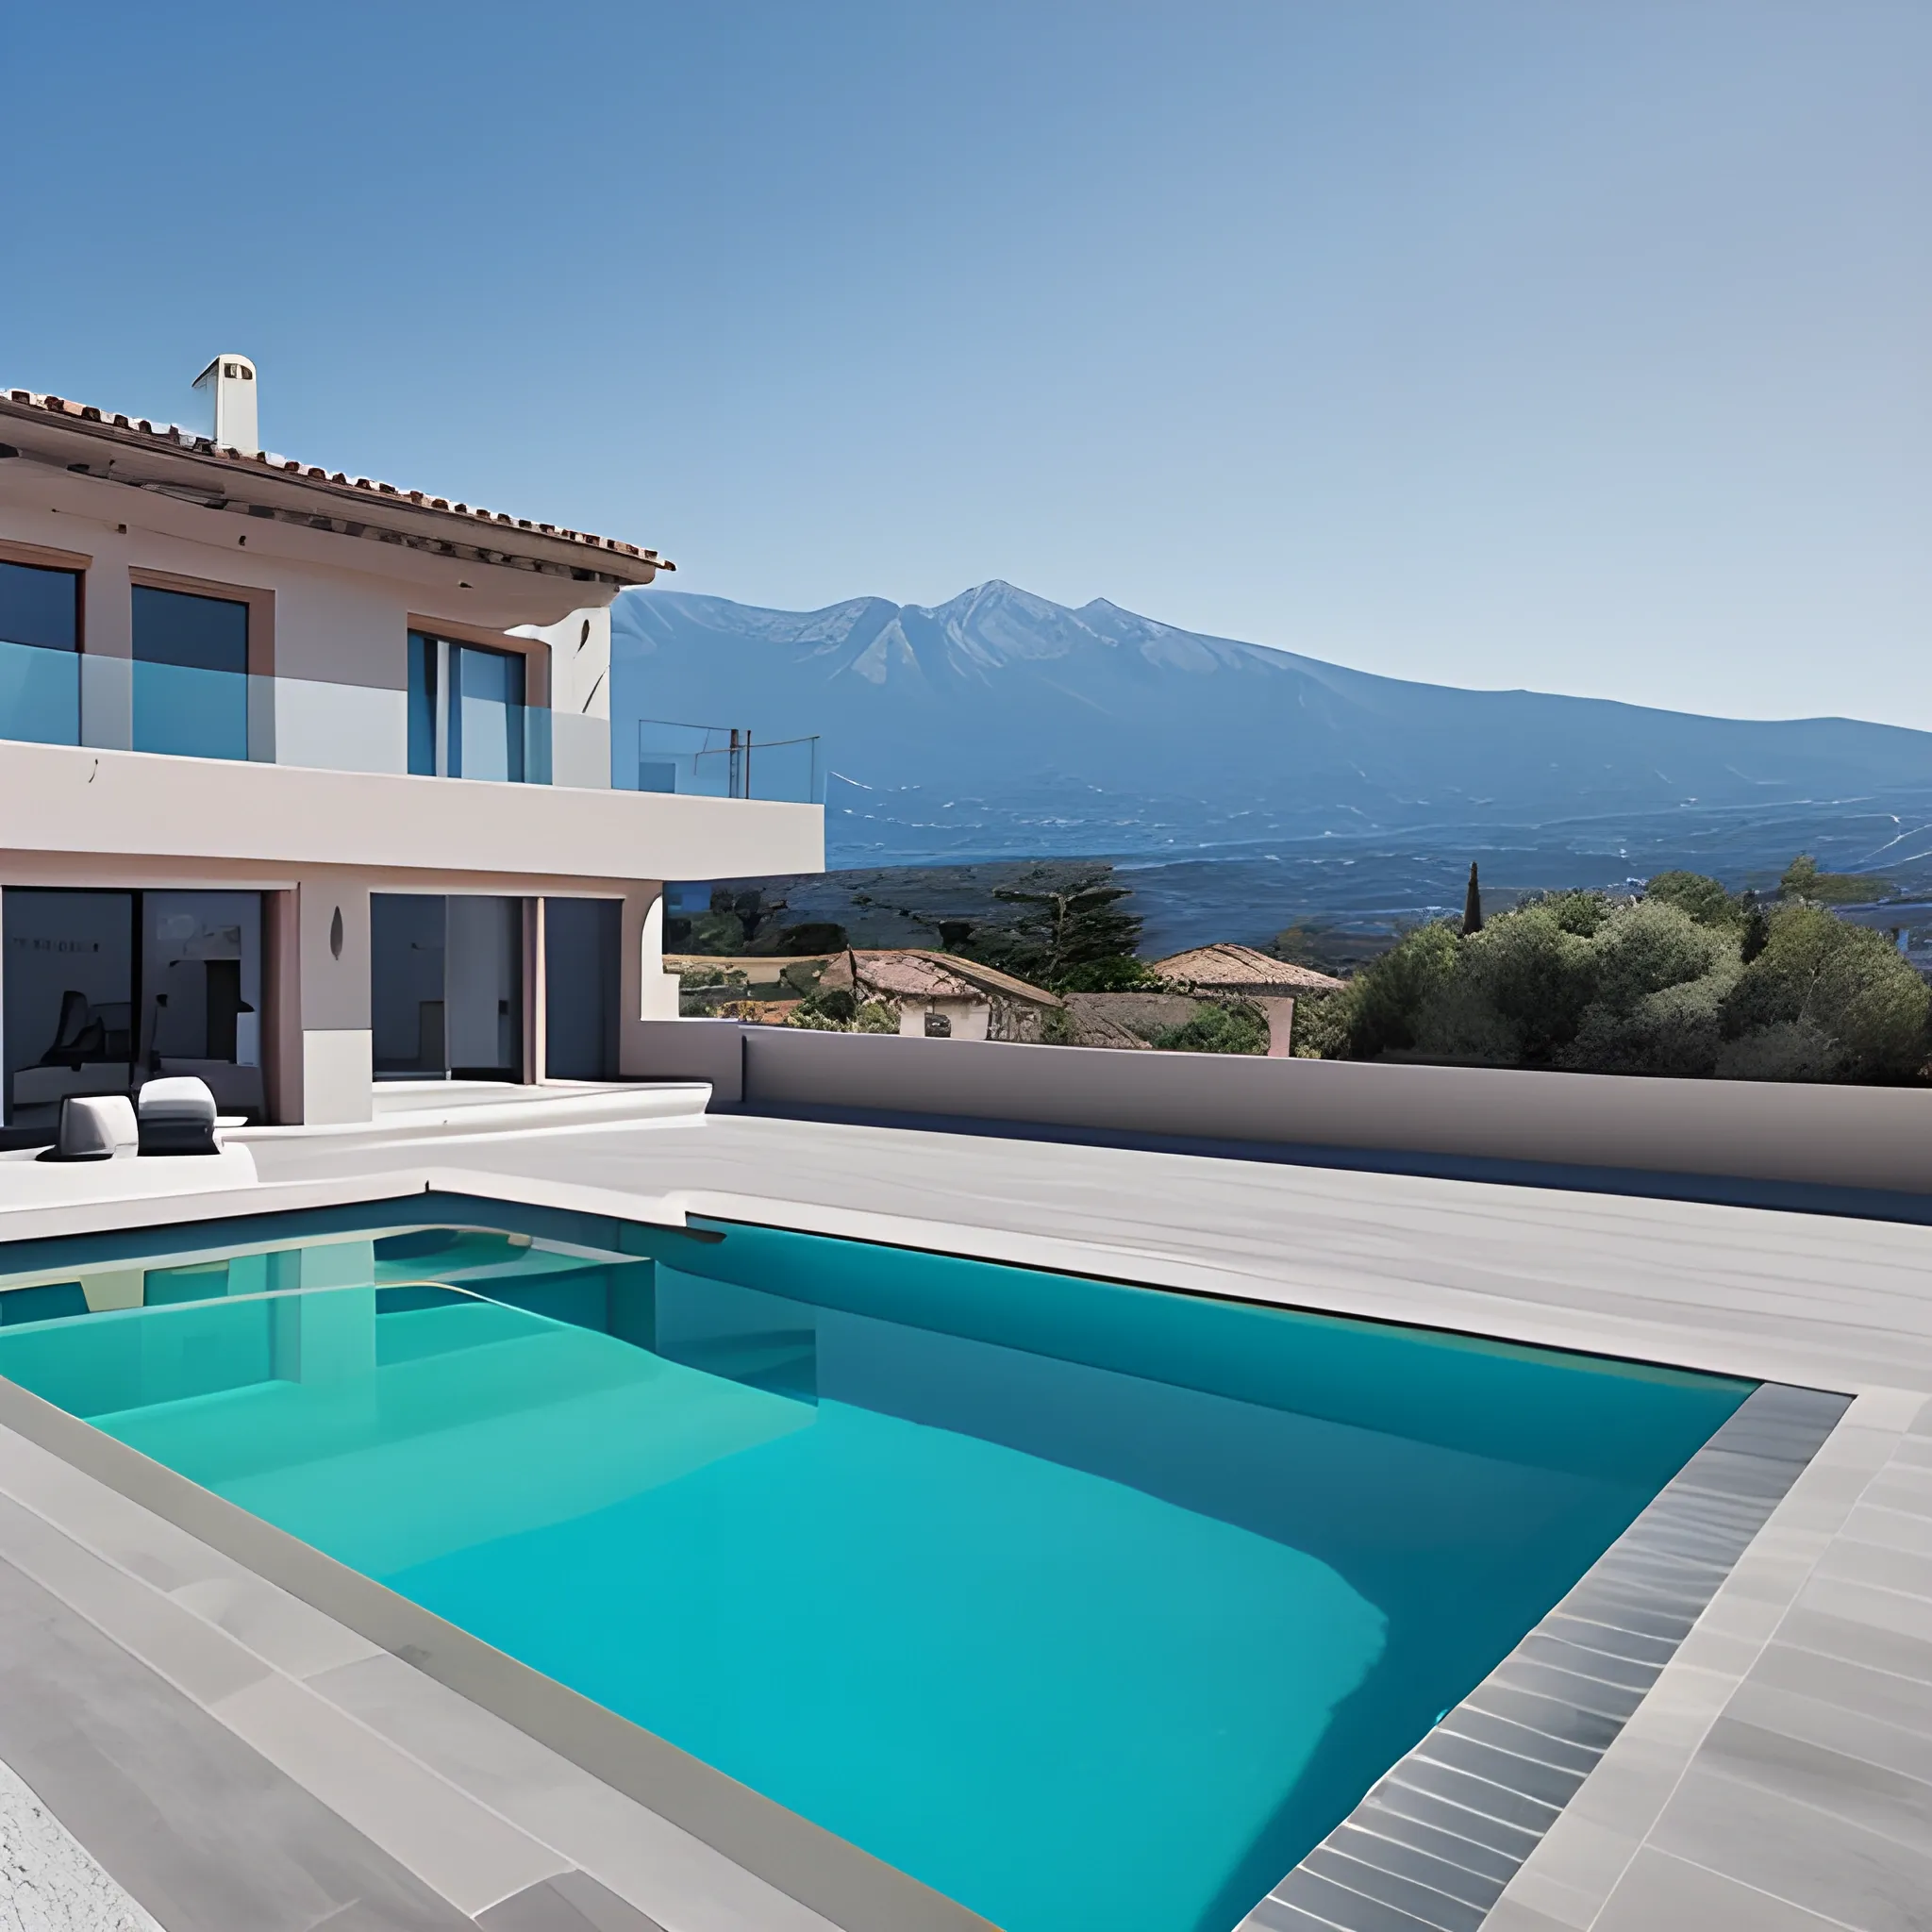 A one story modern villa in dark grey with infinity pool overlooking the mount canigou. A palm tre on the right side of the pool. 
